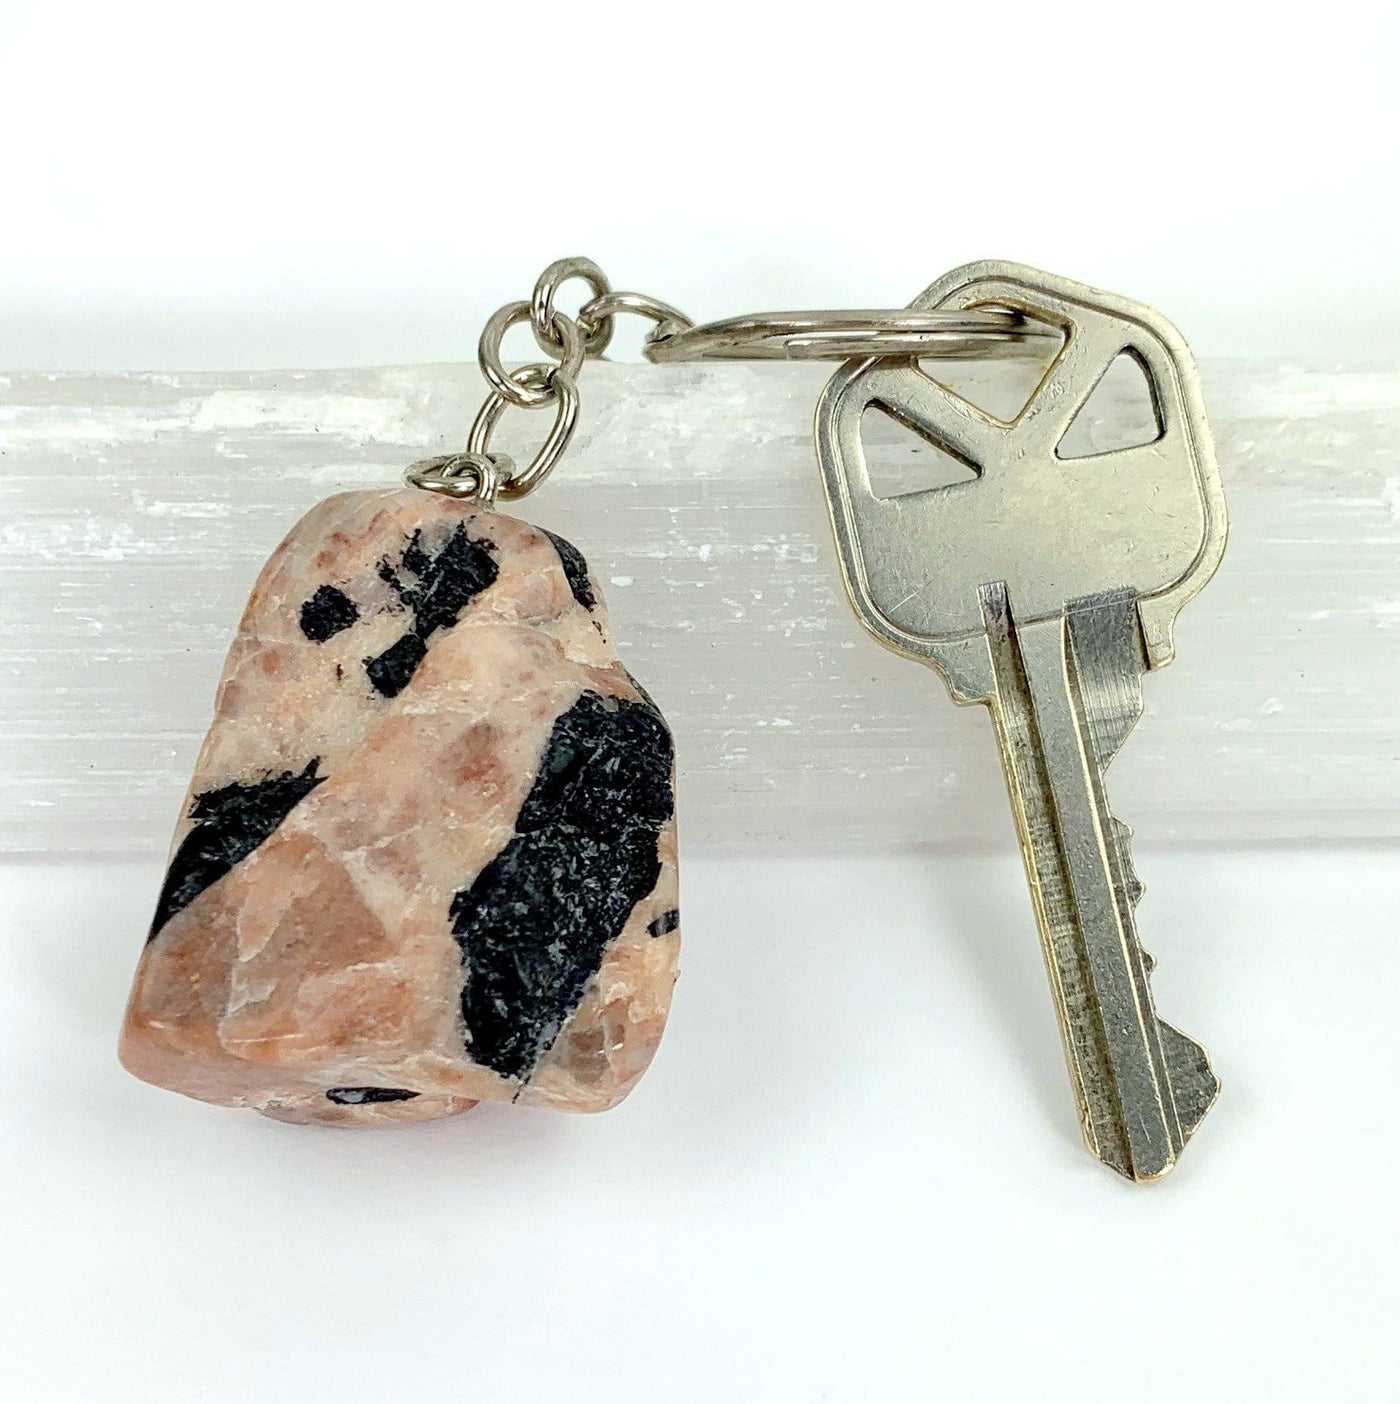  Polished Tourmaline with Feldspar keychain on silver link and hoop attached to key for size reference